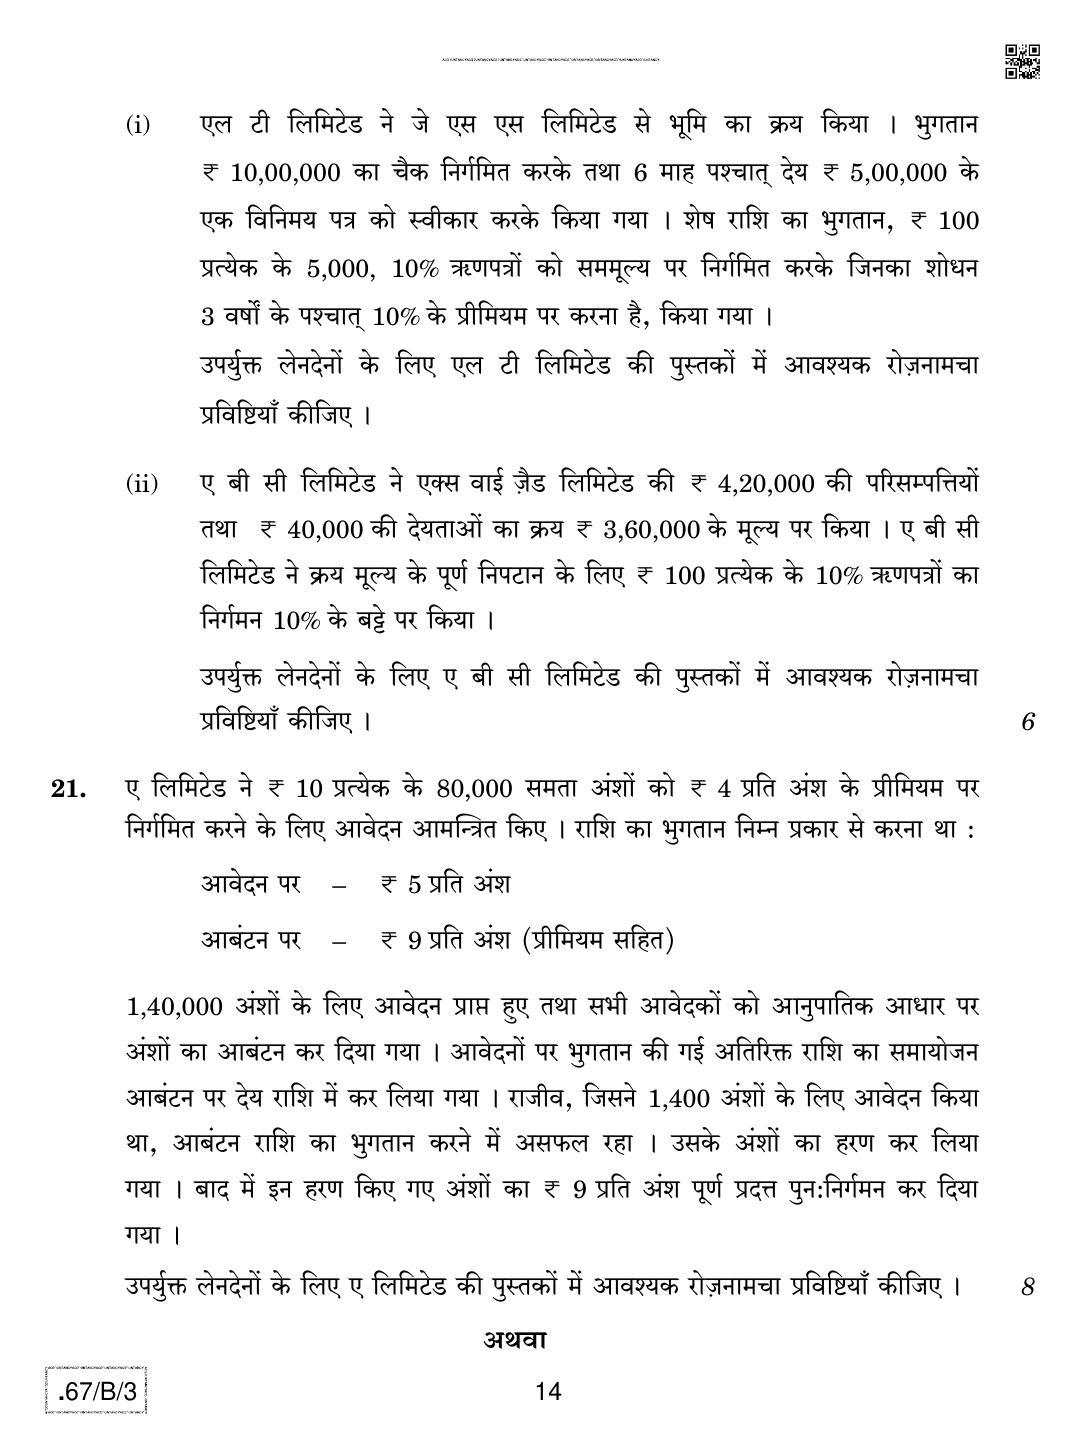 CBSE Class 12 67-C-3 - Accountancy 2020 Compartment Question Paper - Page 14